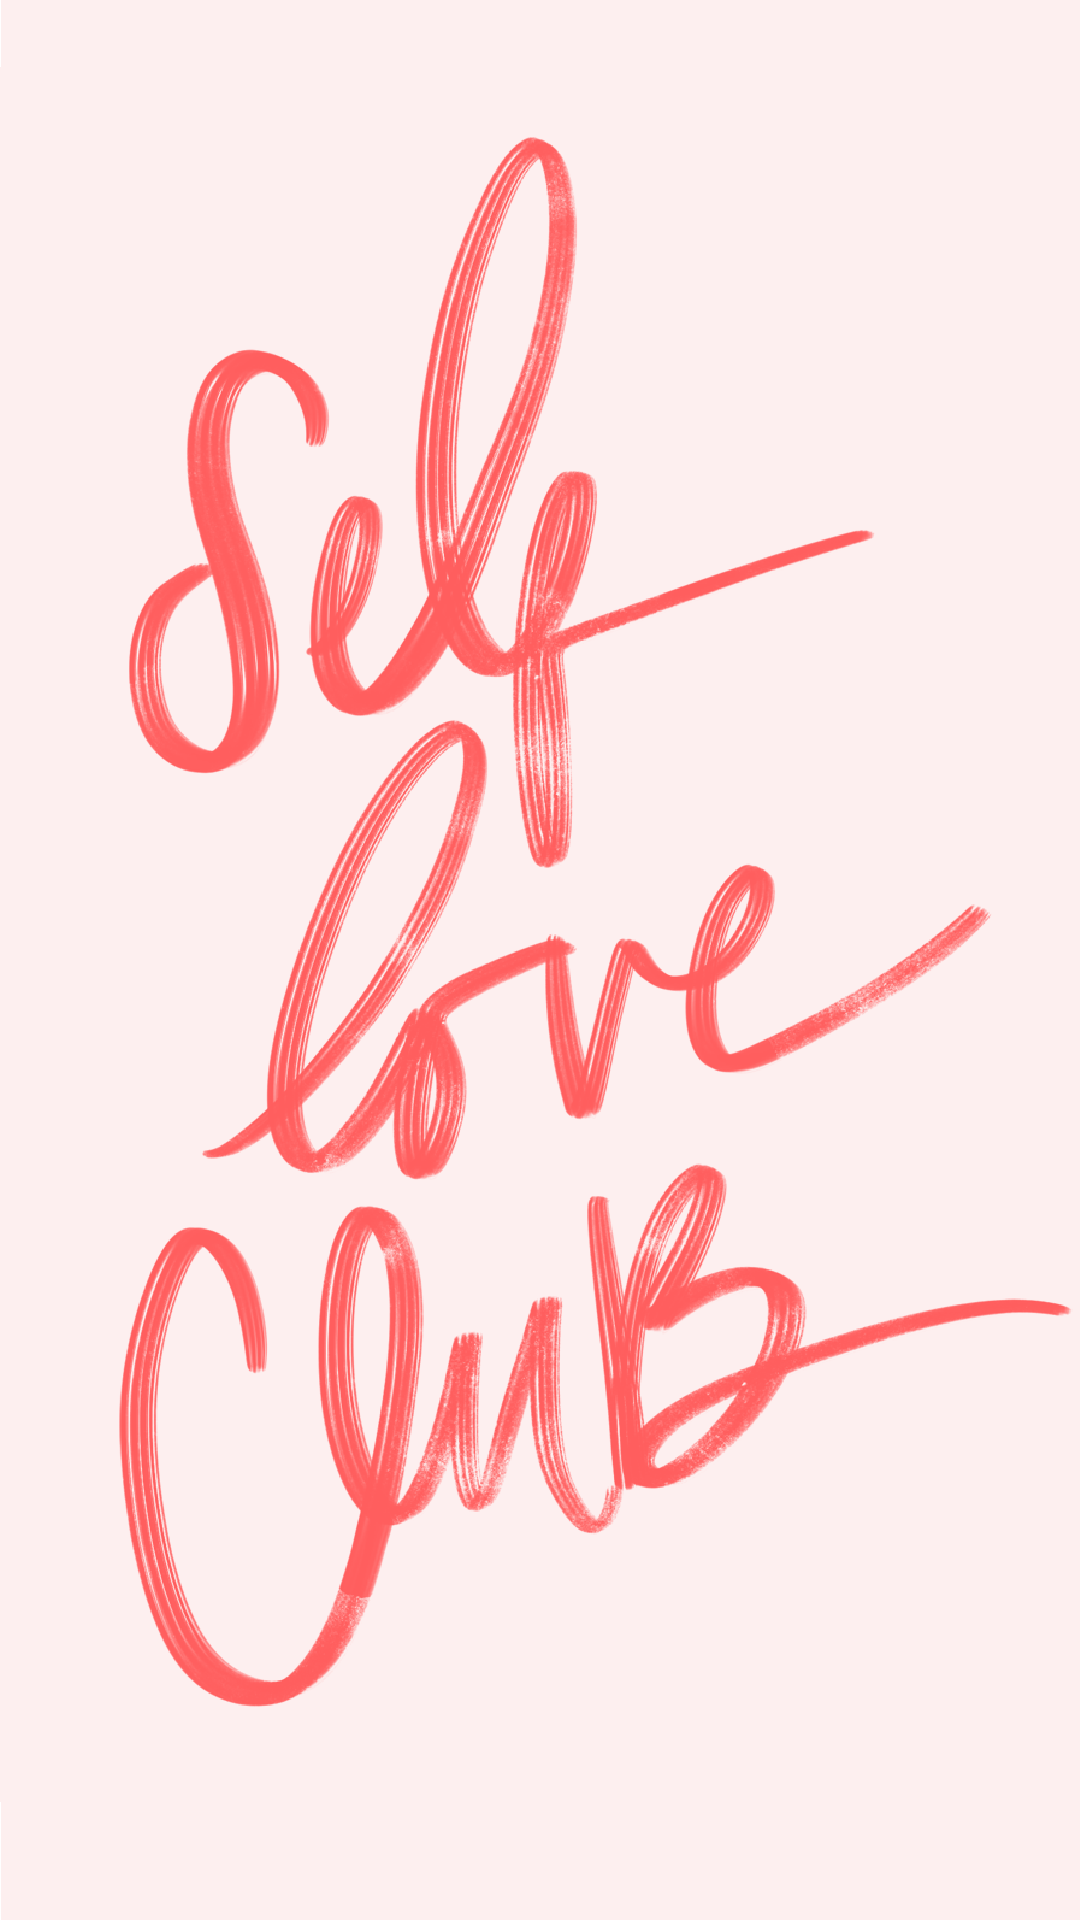 Self Love Wallpaper. Be yourself quotes, Quote background, Self